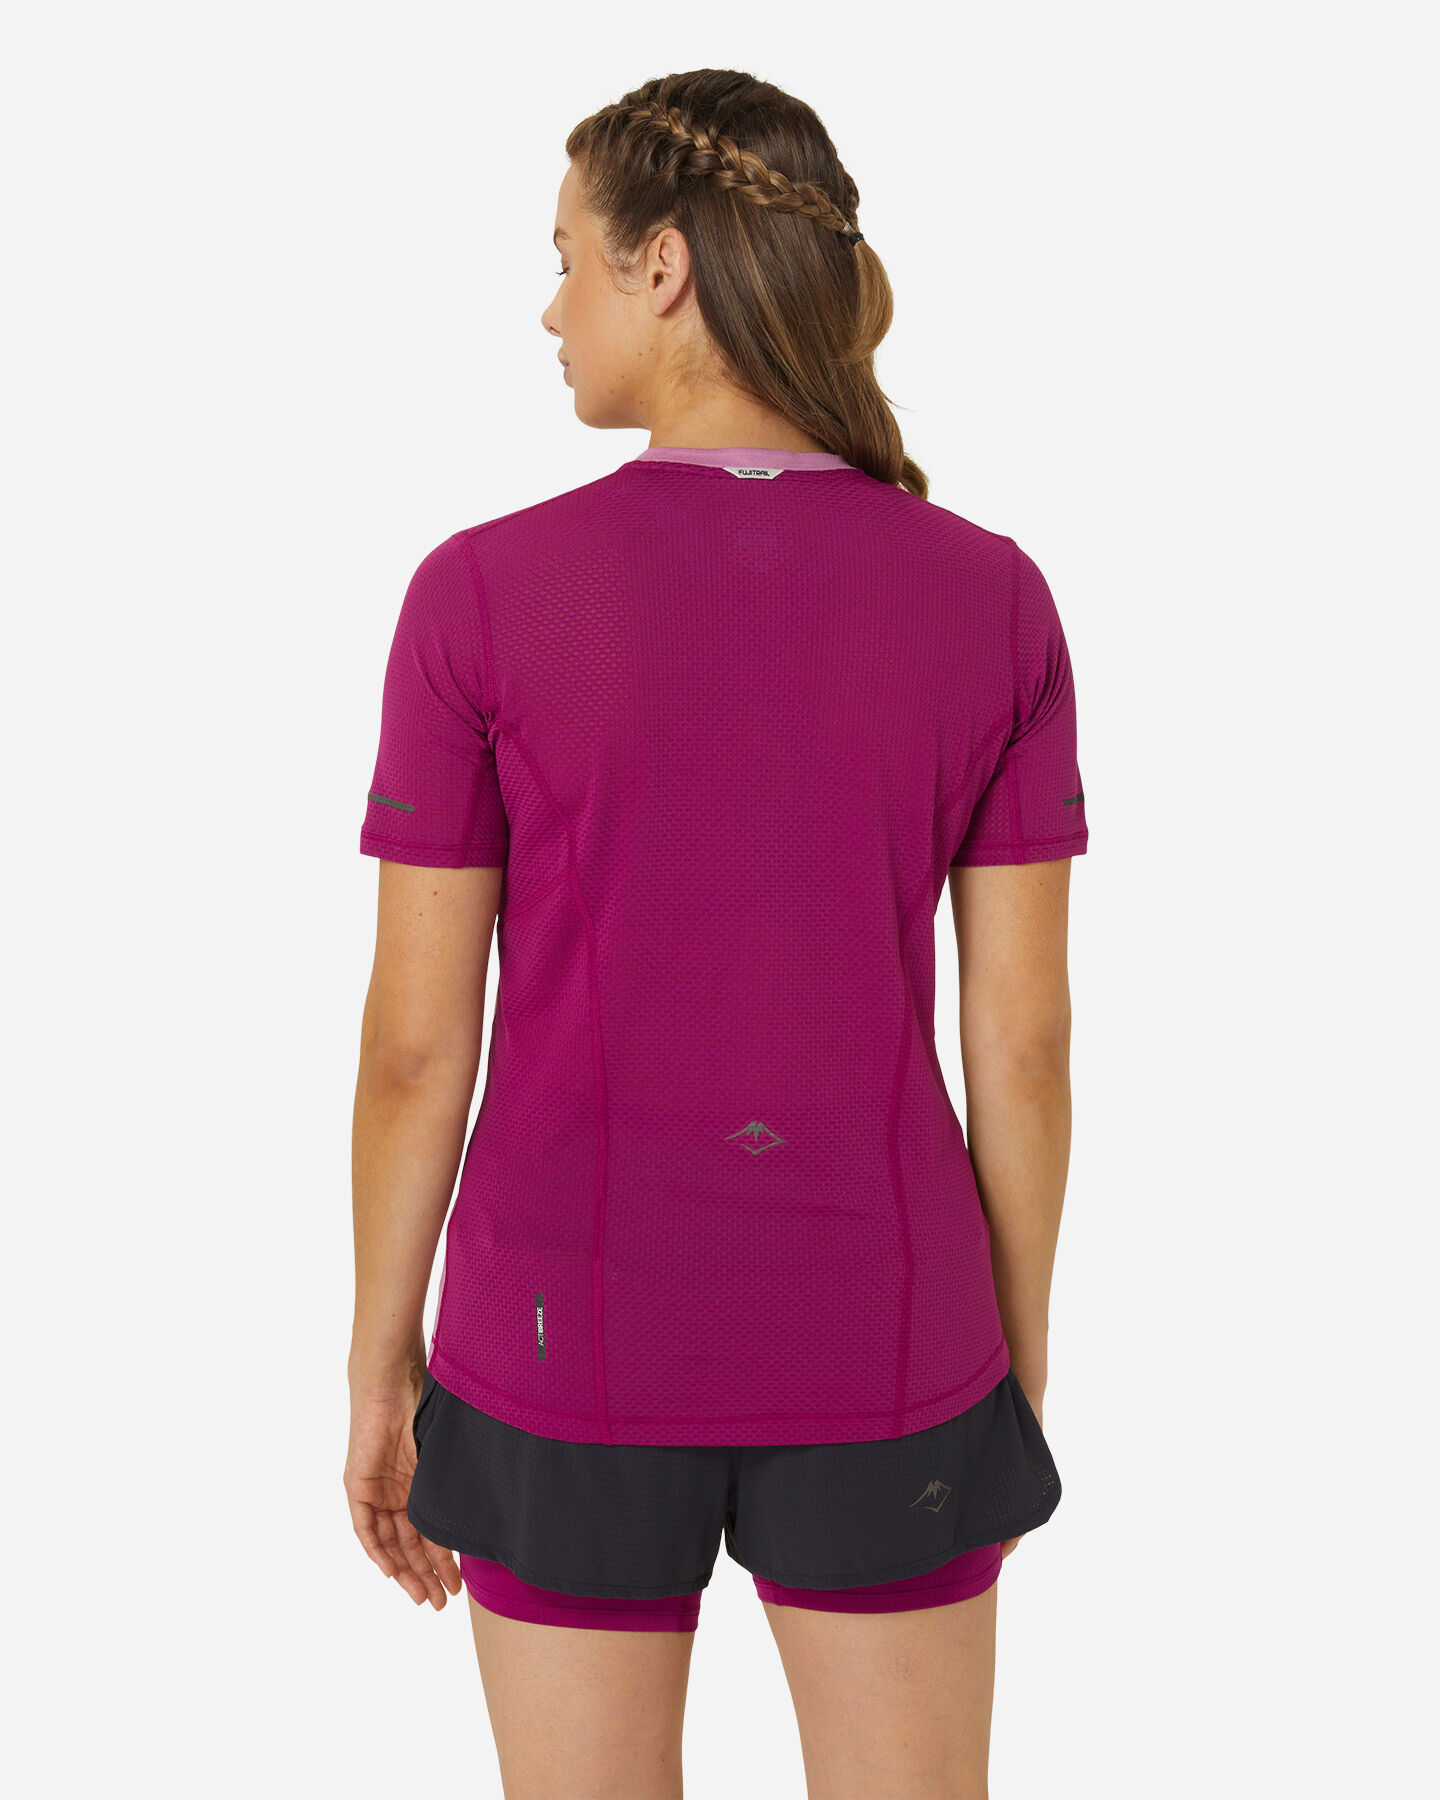  T-Shirt running ASICS ROAD W S5643231|501|XS scatto 1